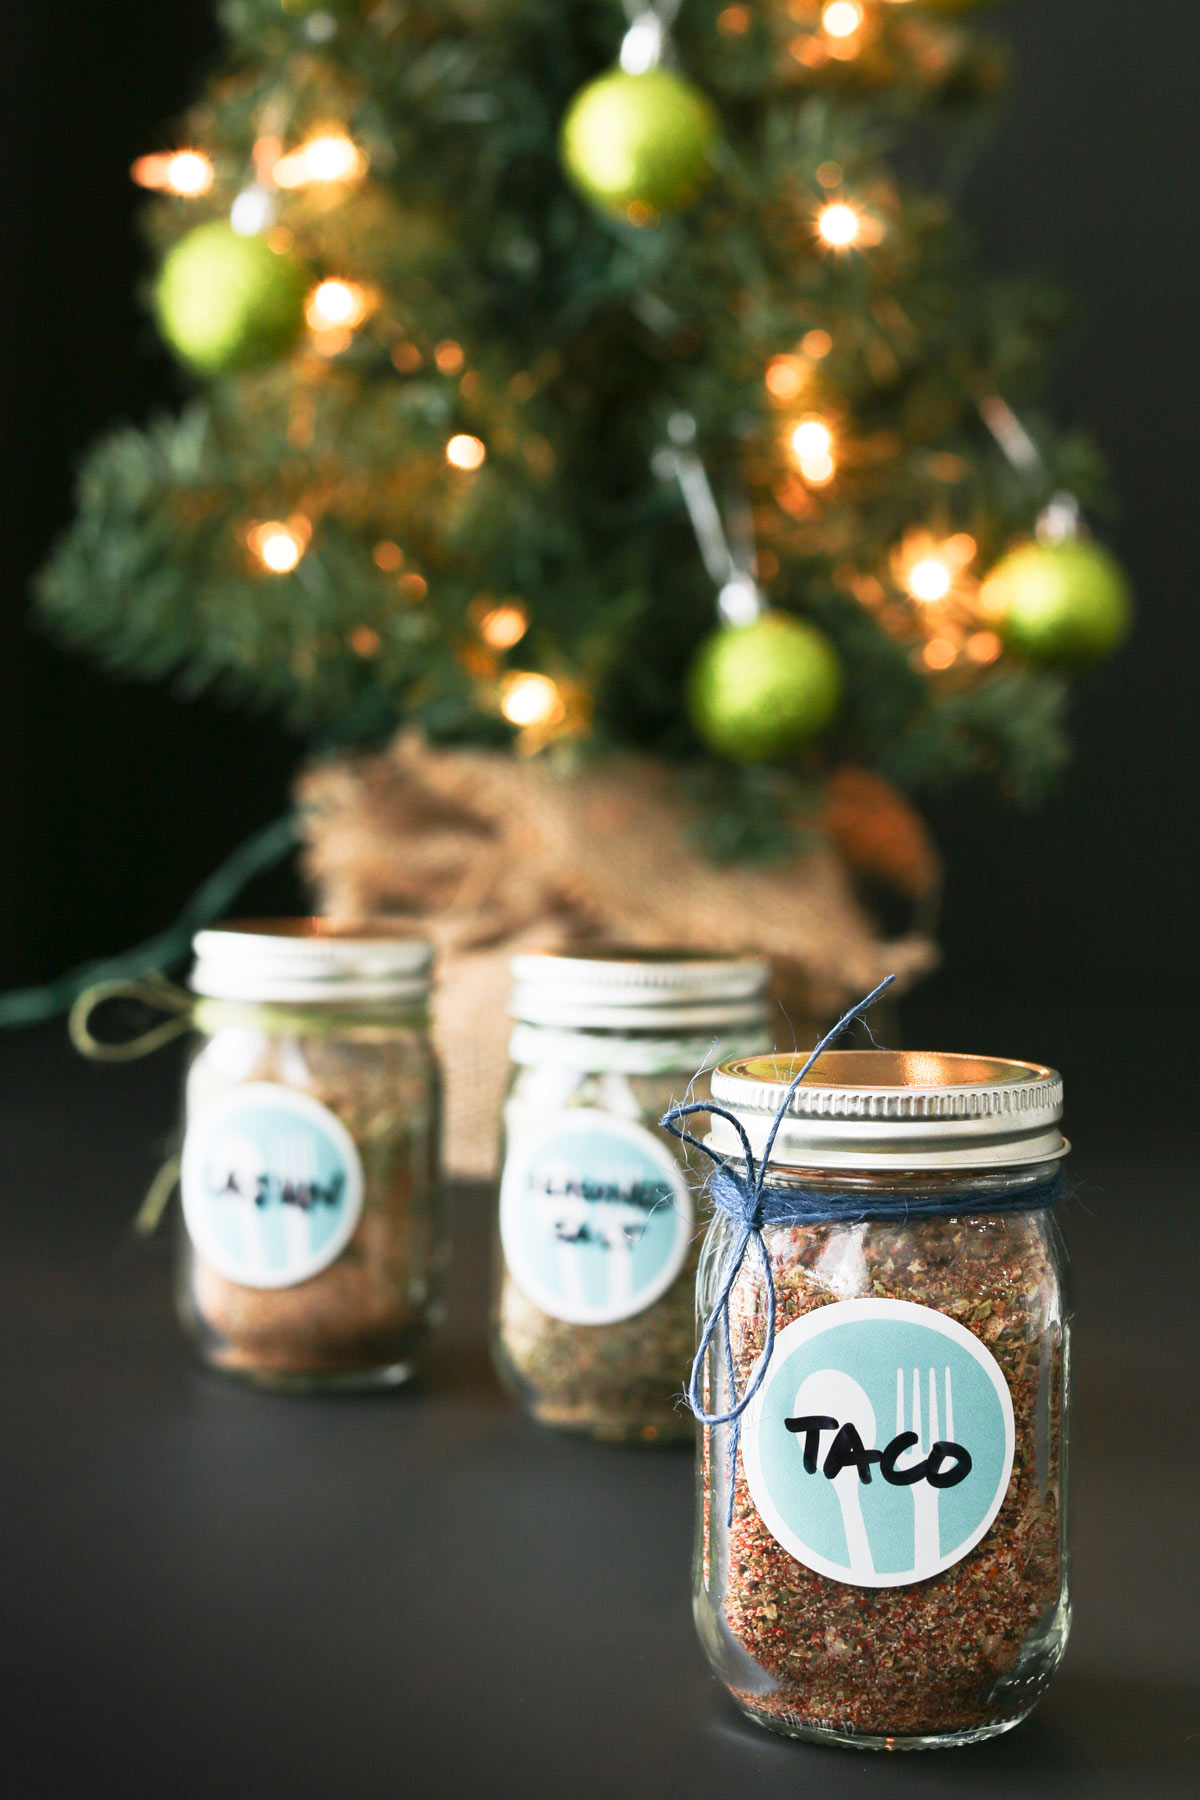 small jars of spice mixes on a black table near a lit christmas tree with green balls.